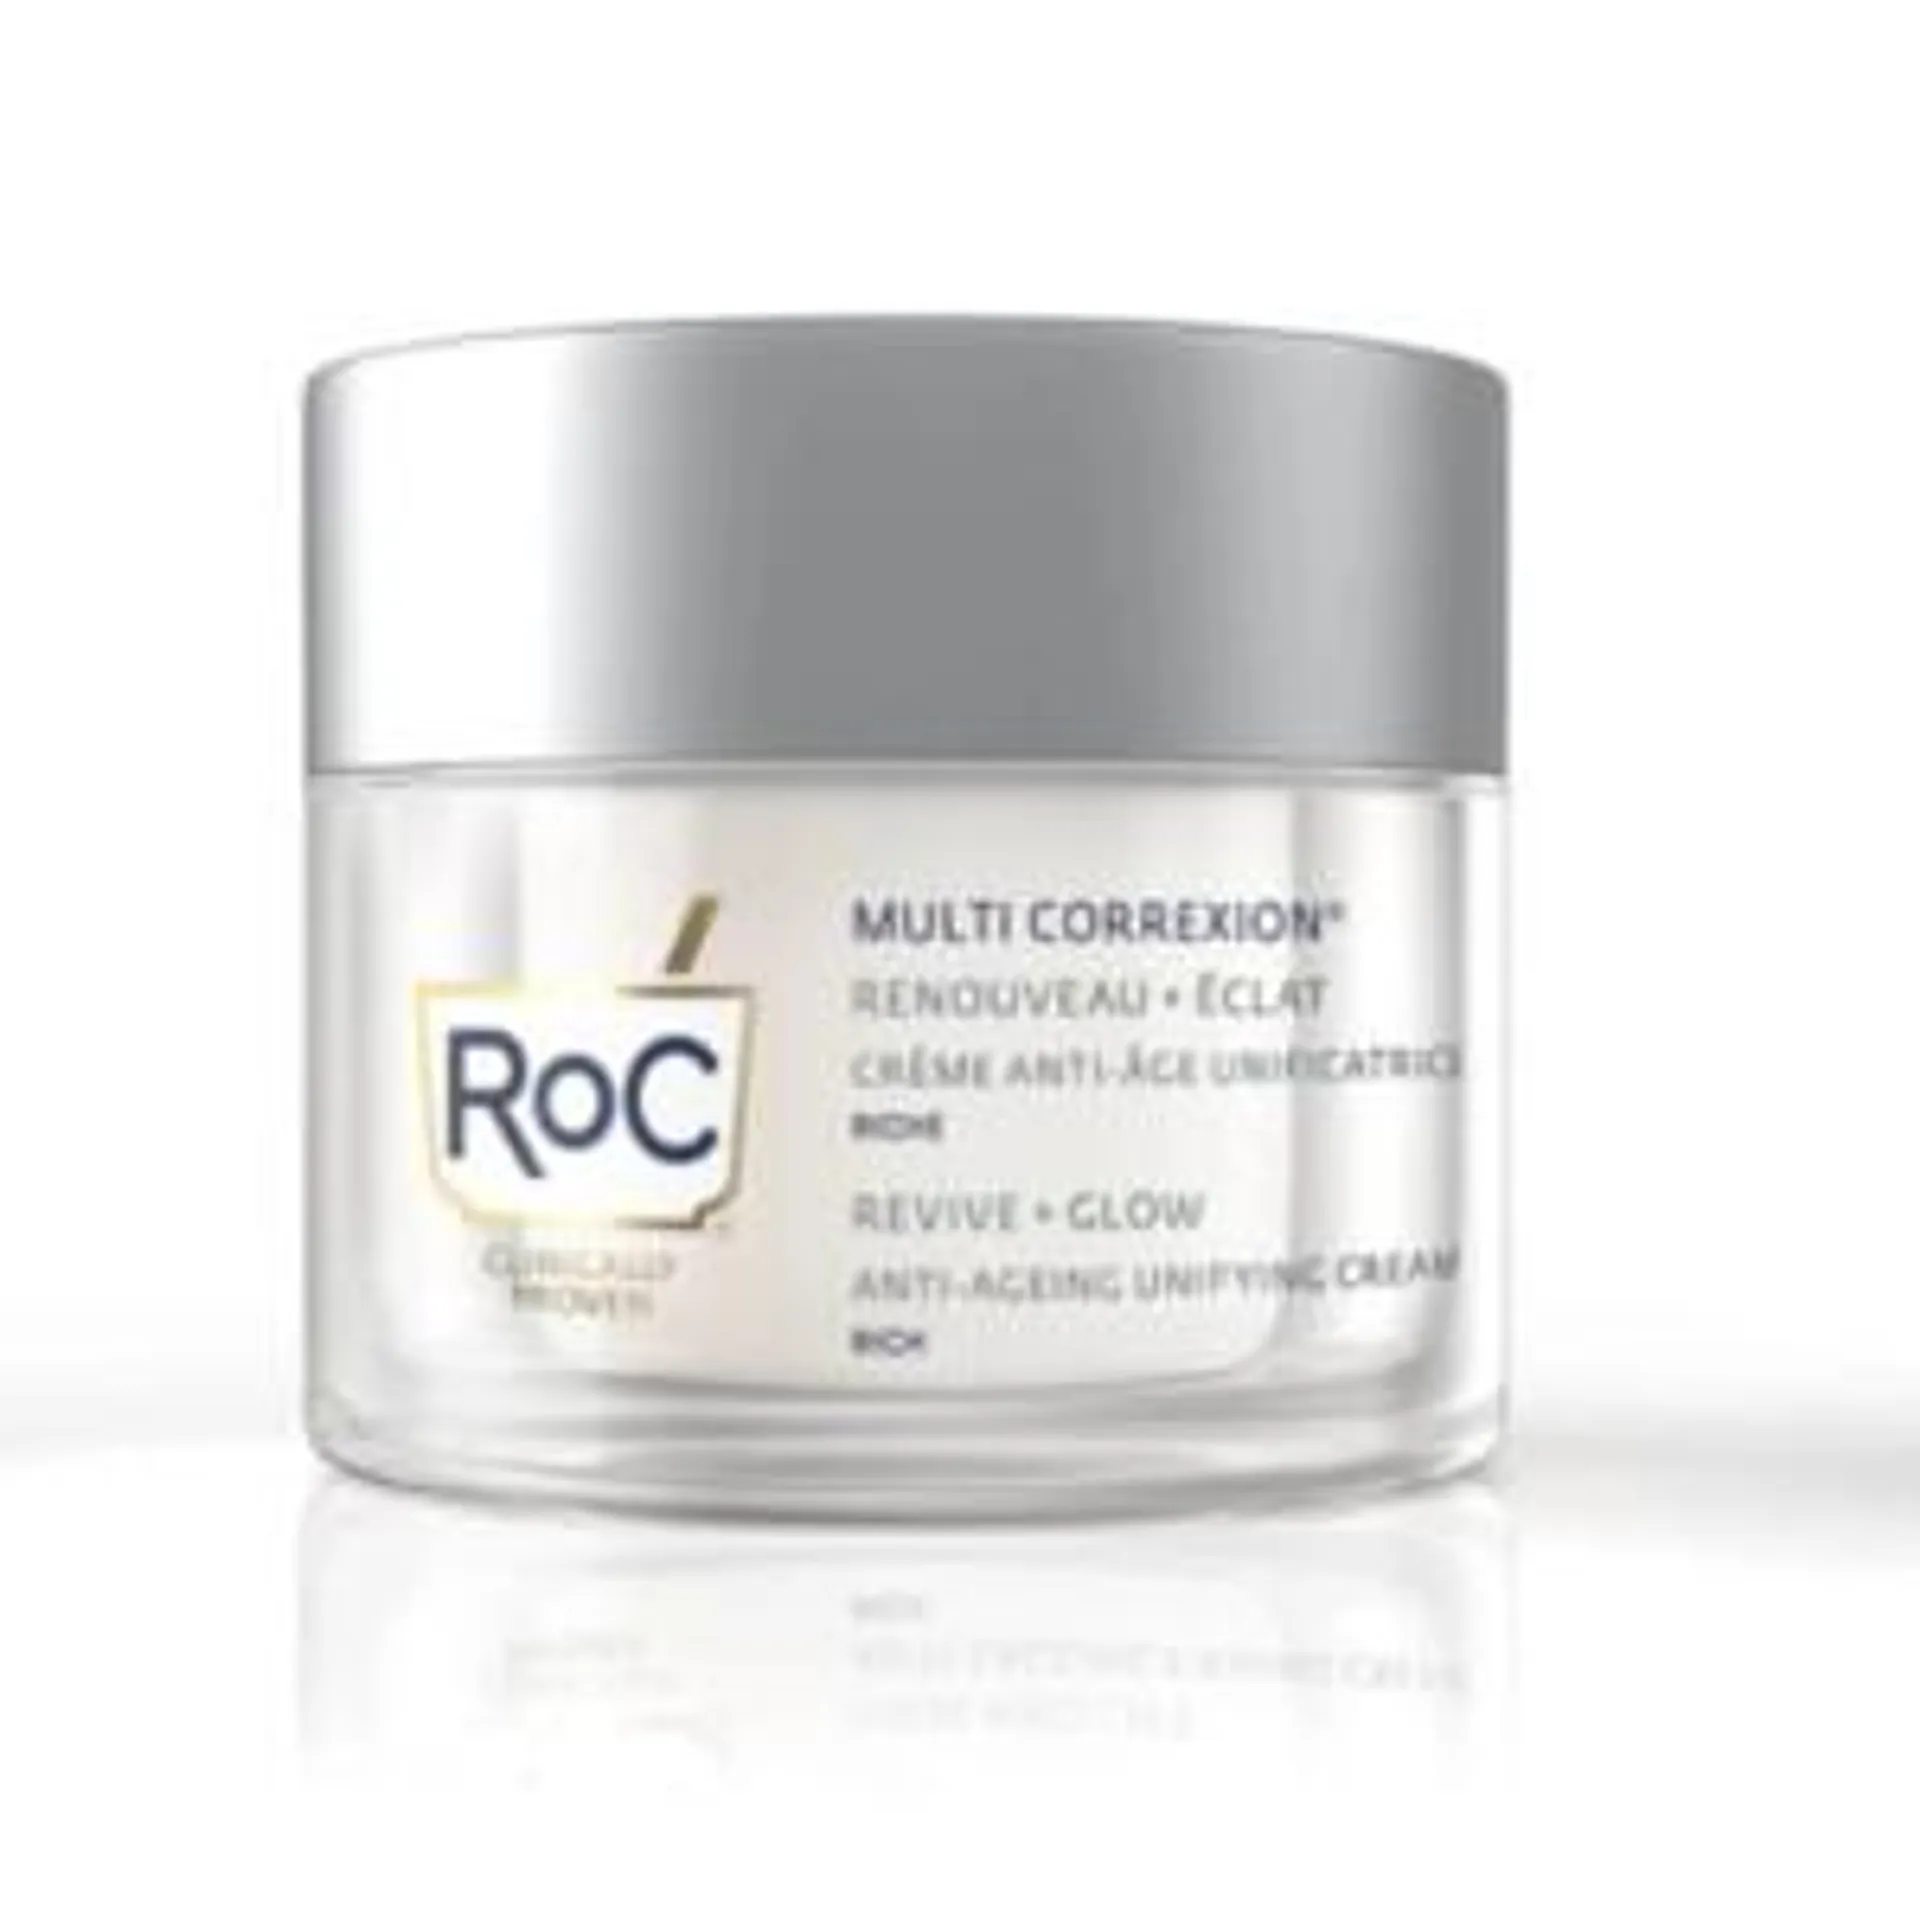 RoC Multi Correxion Revive And Glow Unifying Anti-Aging Crème 50 ml